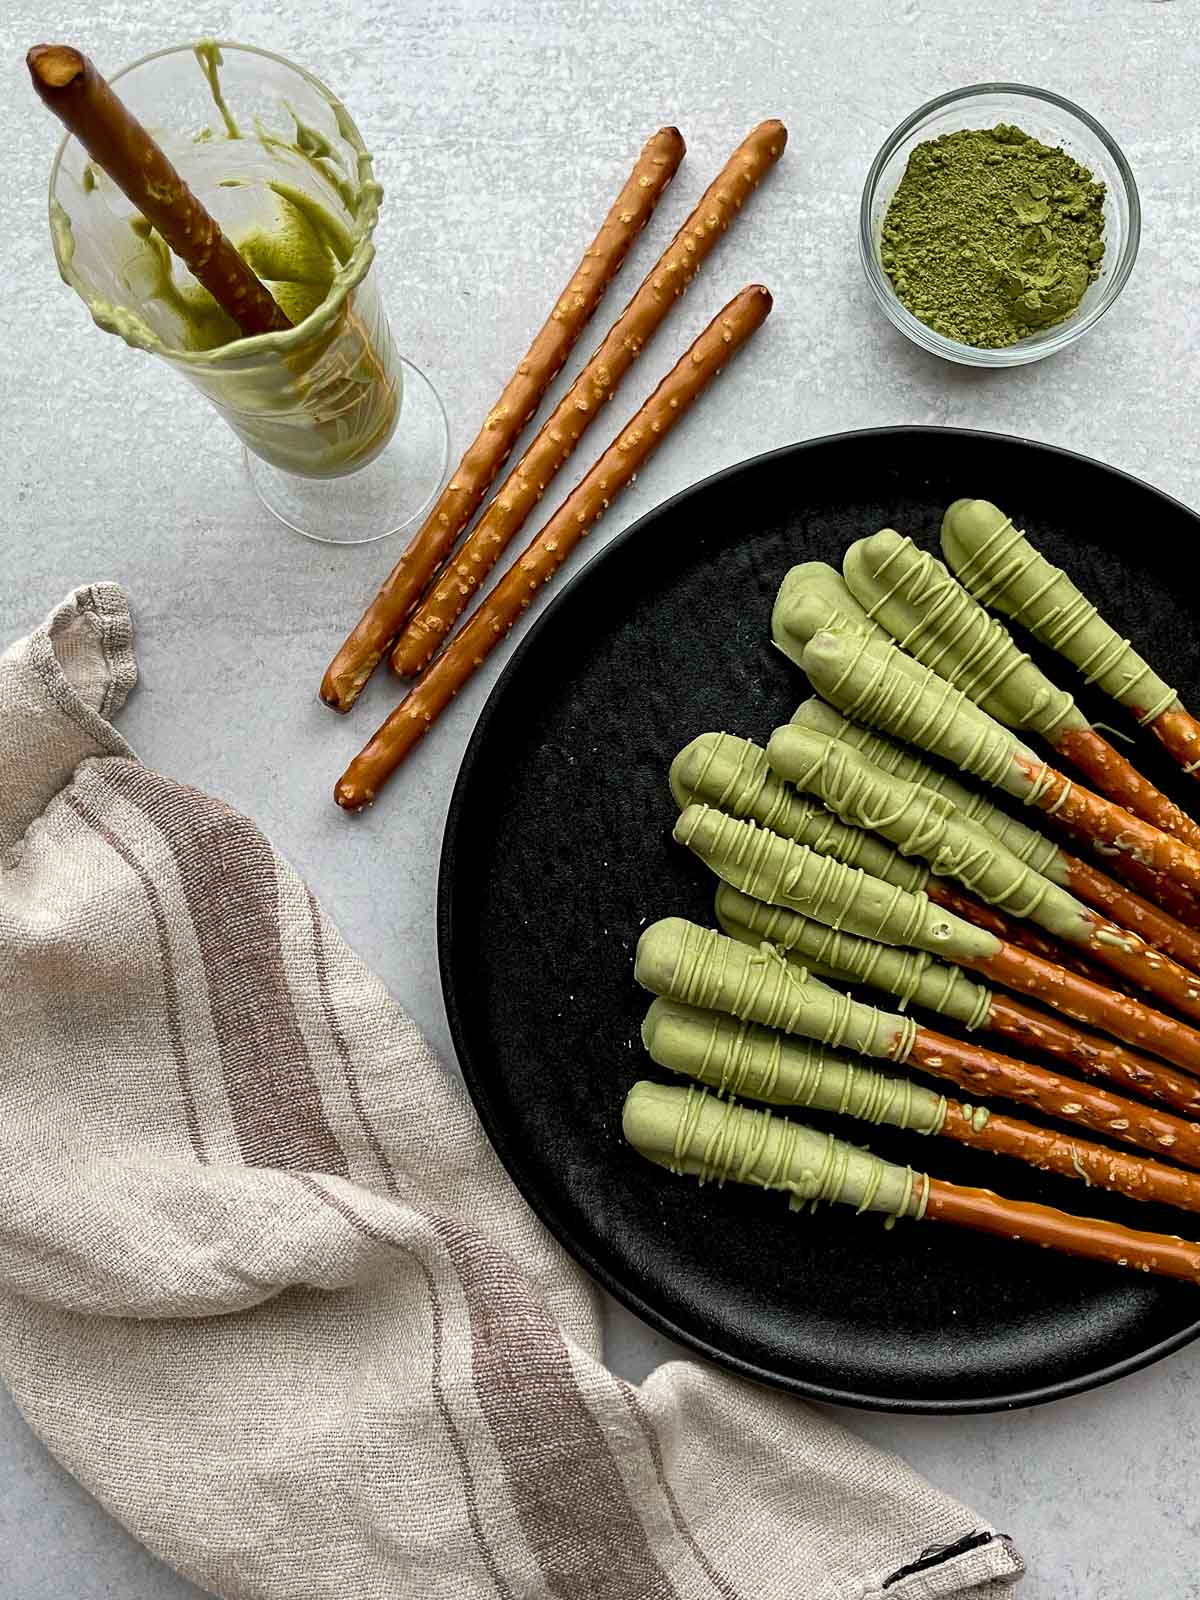 Matcha chocolate dipped pretzel rods on top of a round black plate with plain pretzel rods on the side, and a small bowl of matcha powder and a glass with a dipped pretzel rod, and a linen napkin on the side.